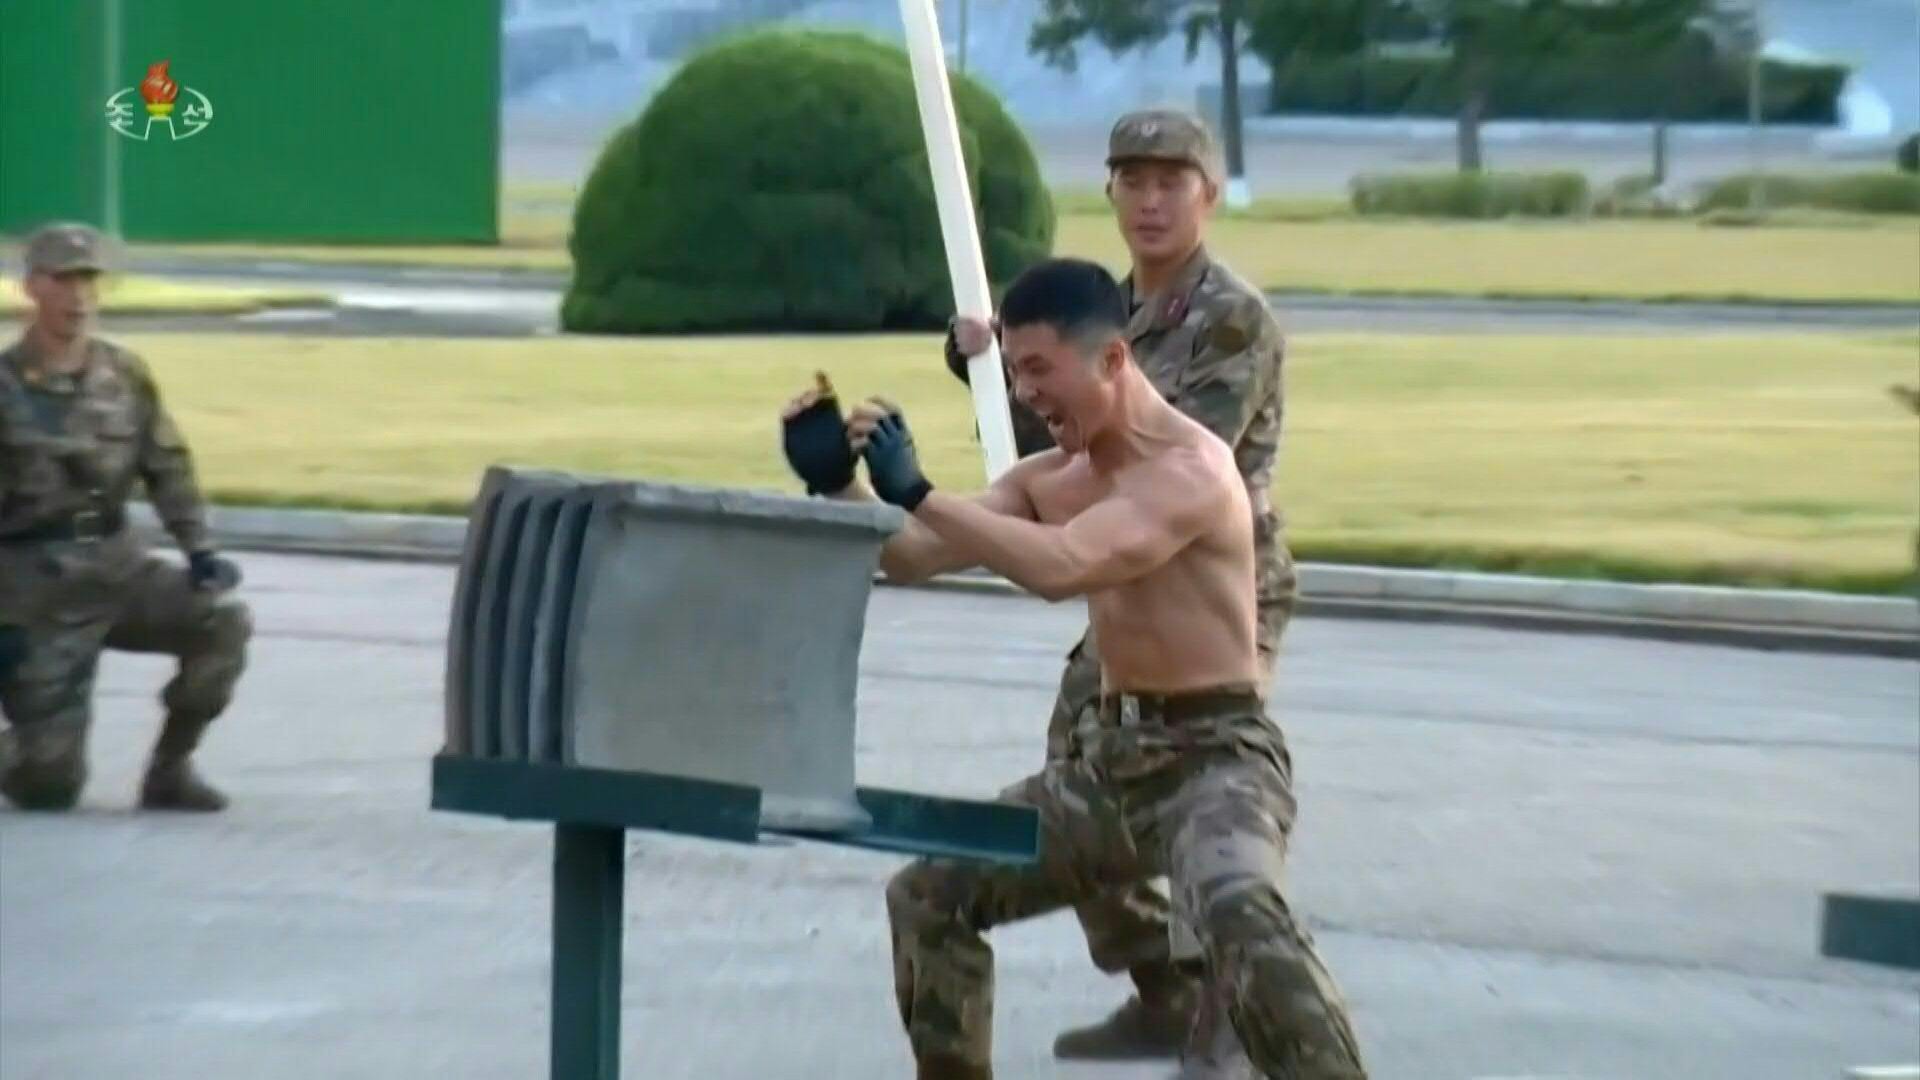 N. Korean army gives brutal show of 'strength, bravery and morale'